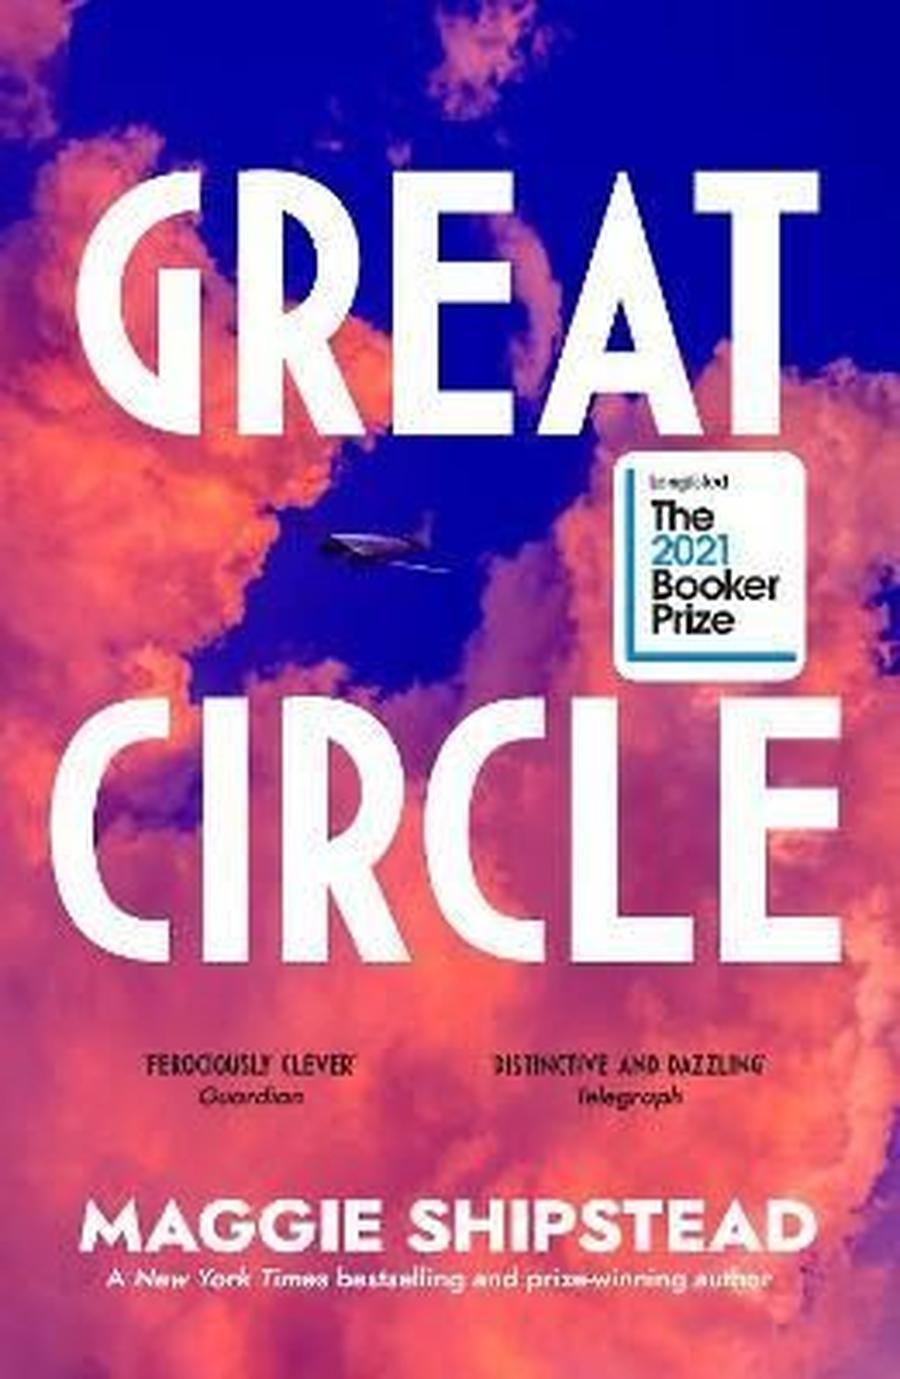 Great Circle - Shipstead Maggie